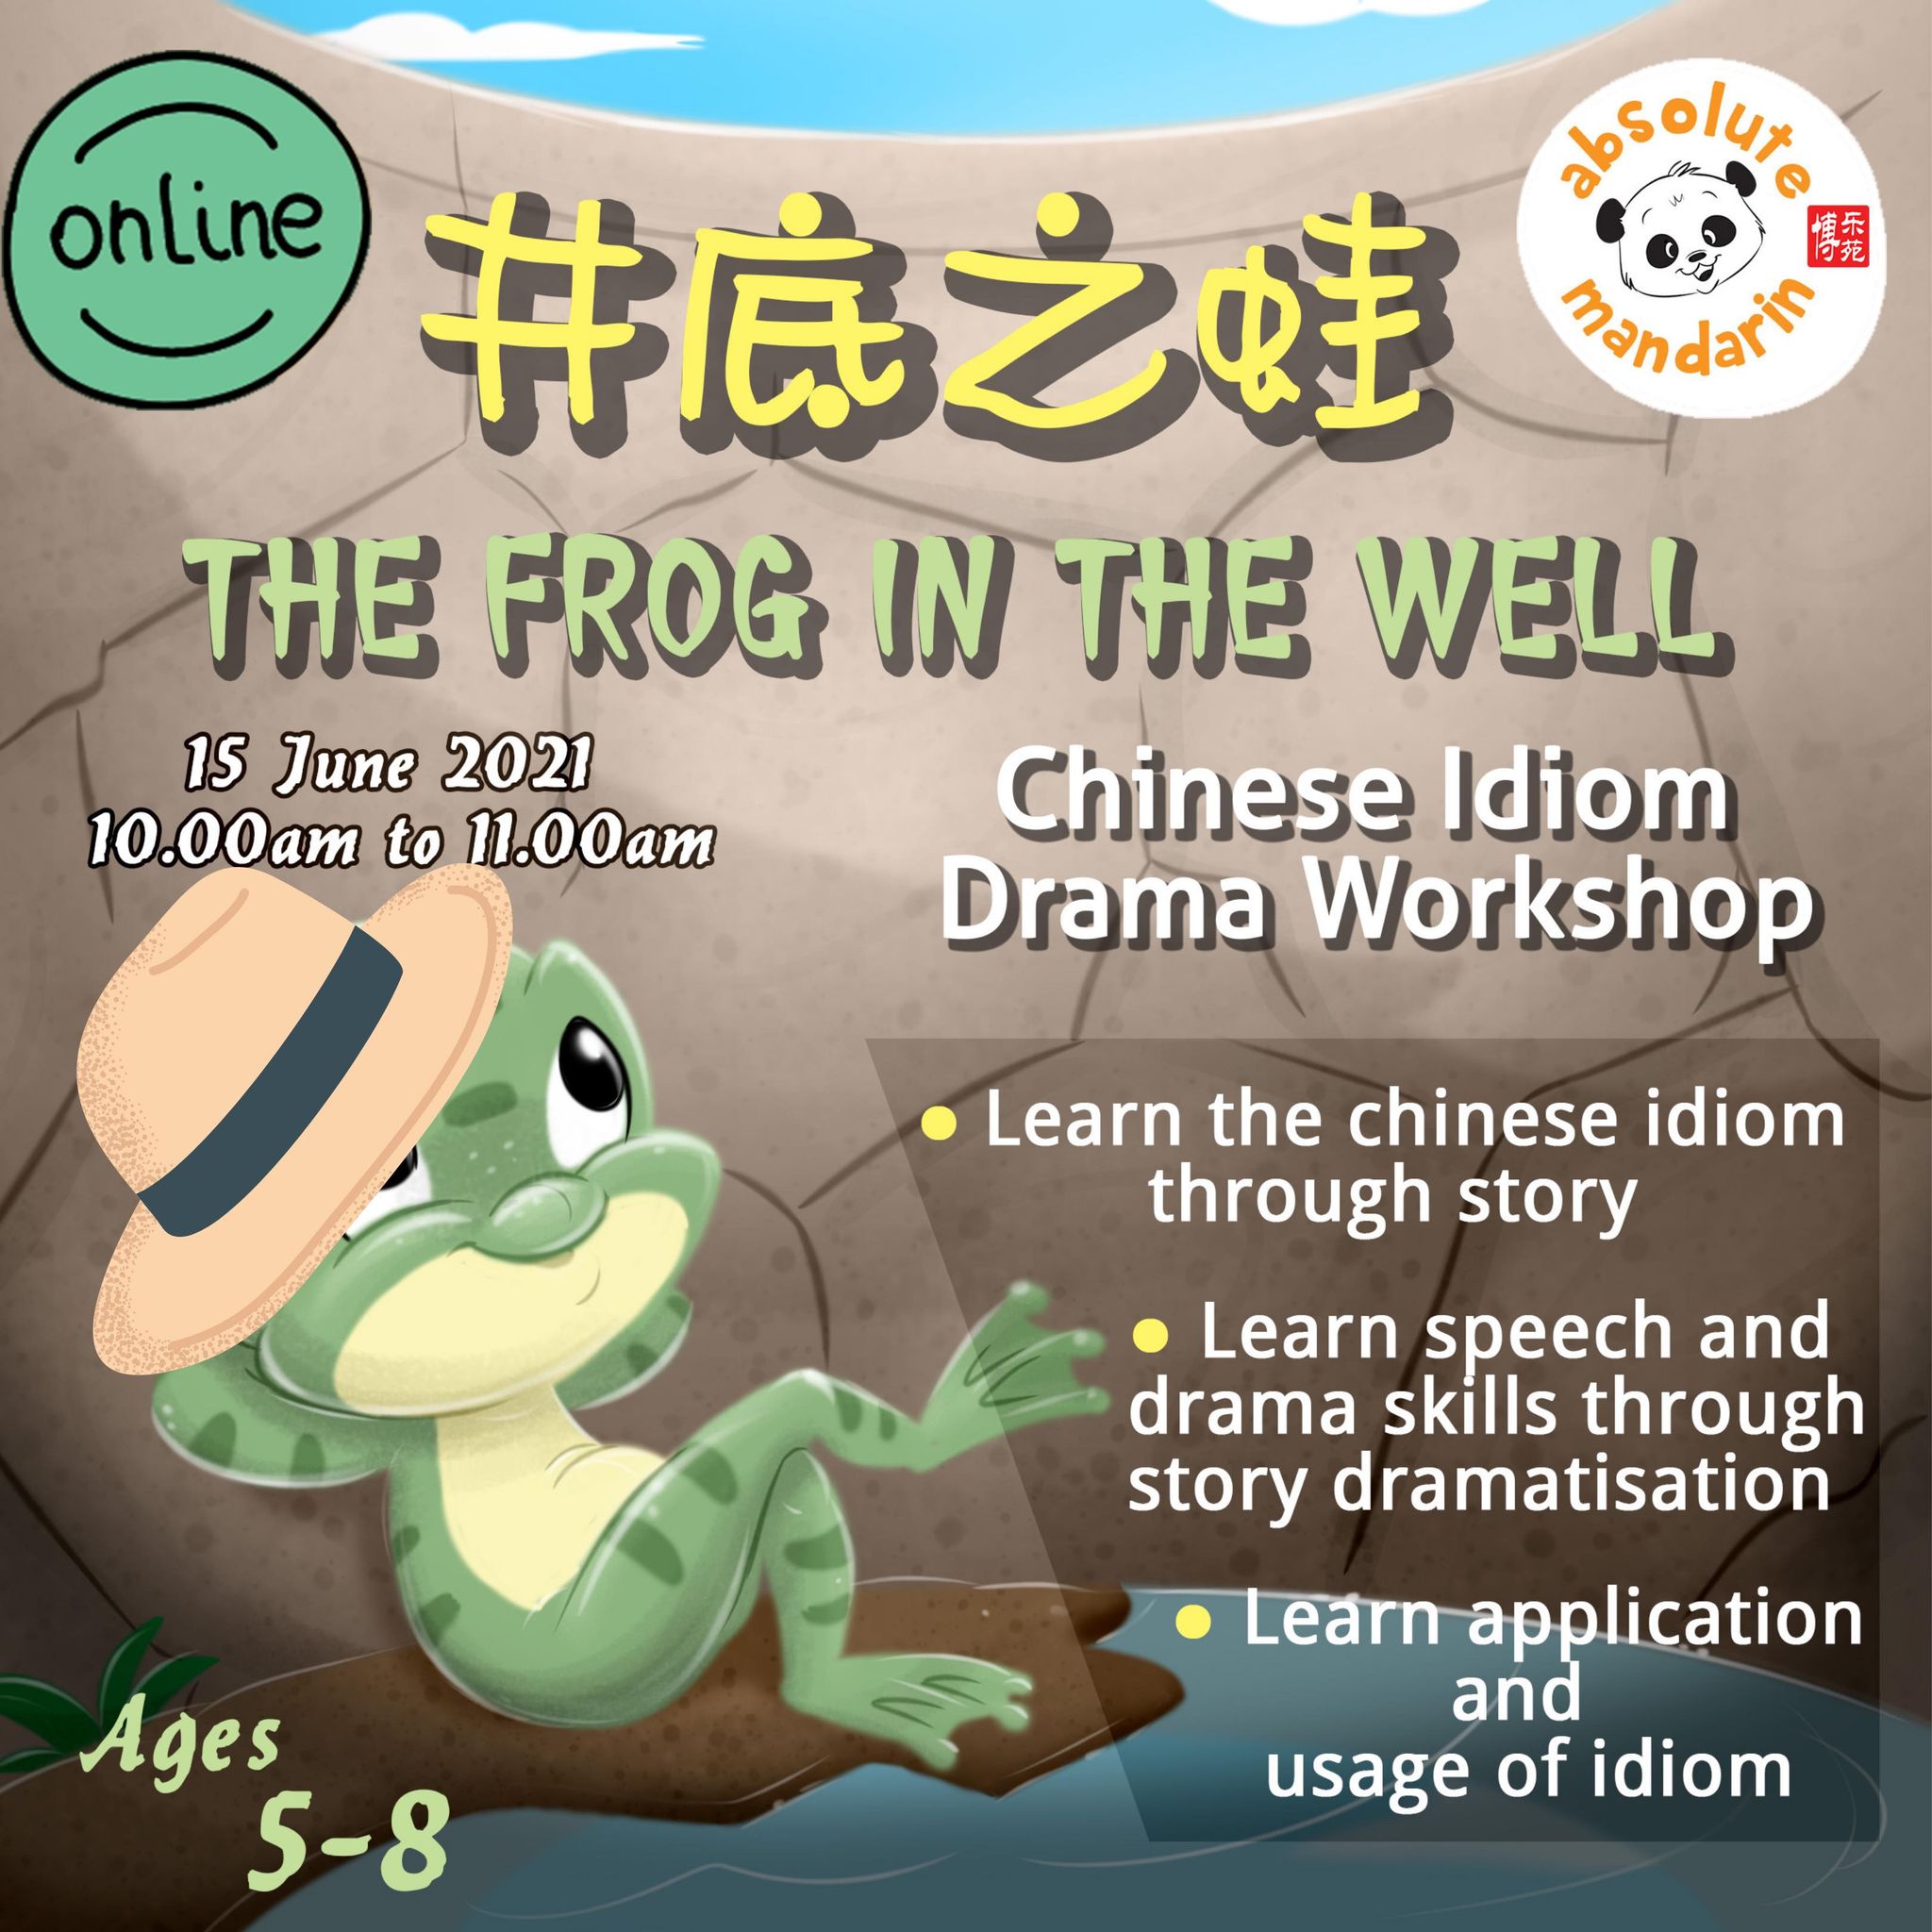 Workshop: The Frog in the Well